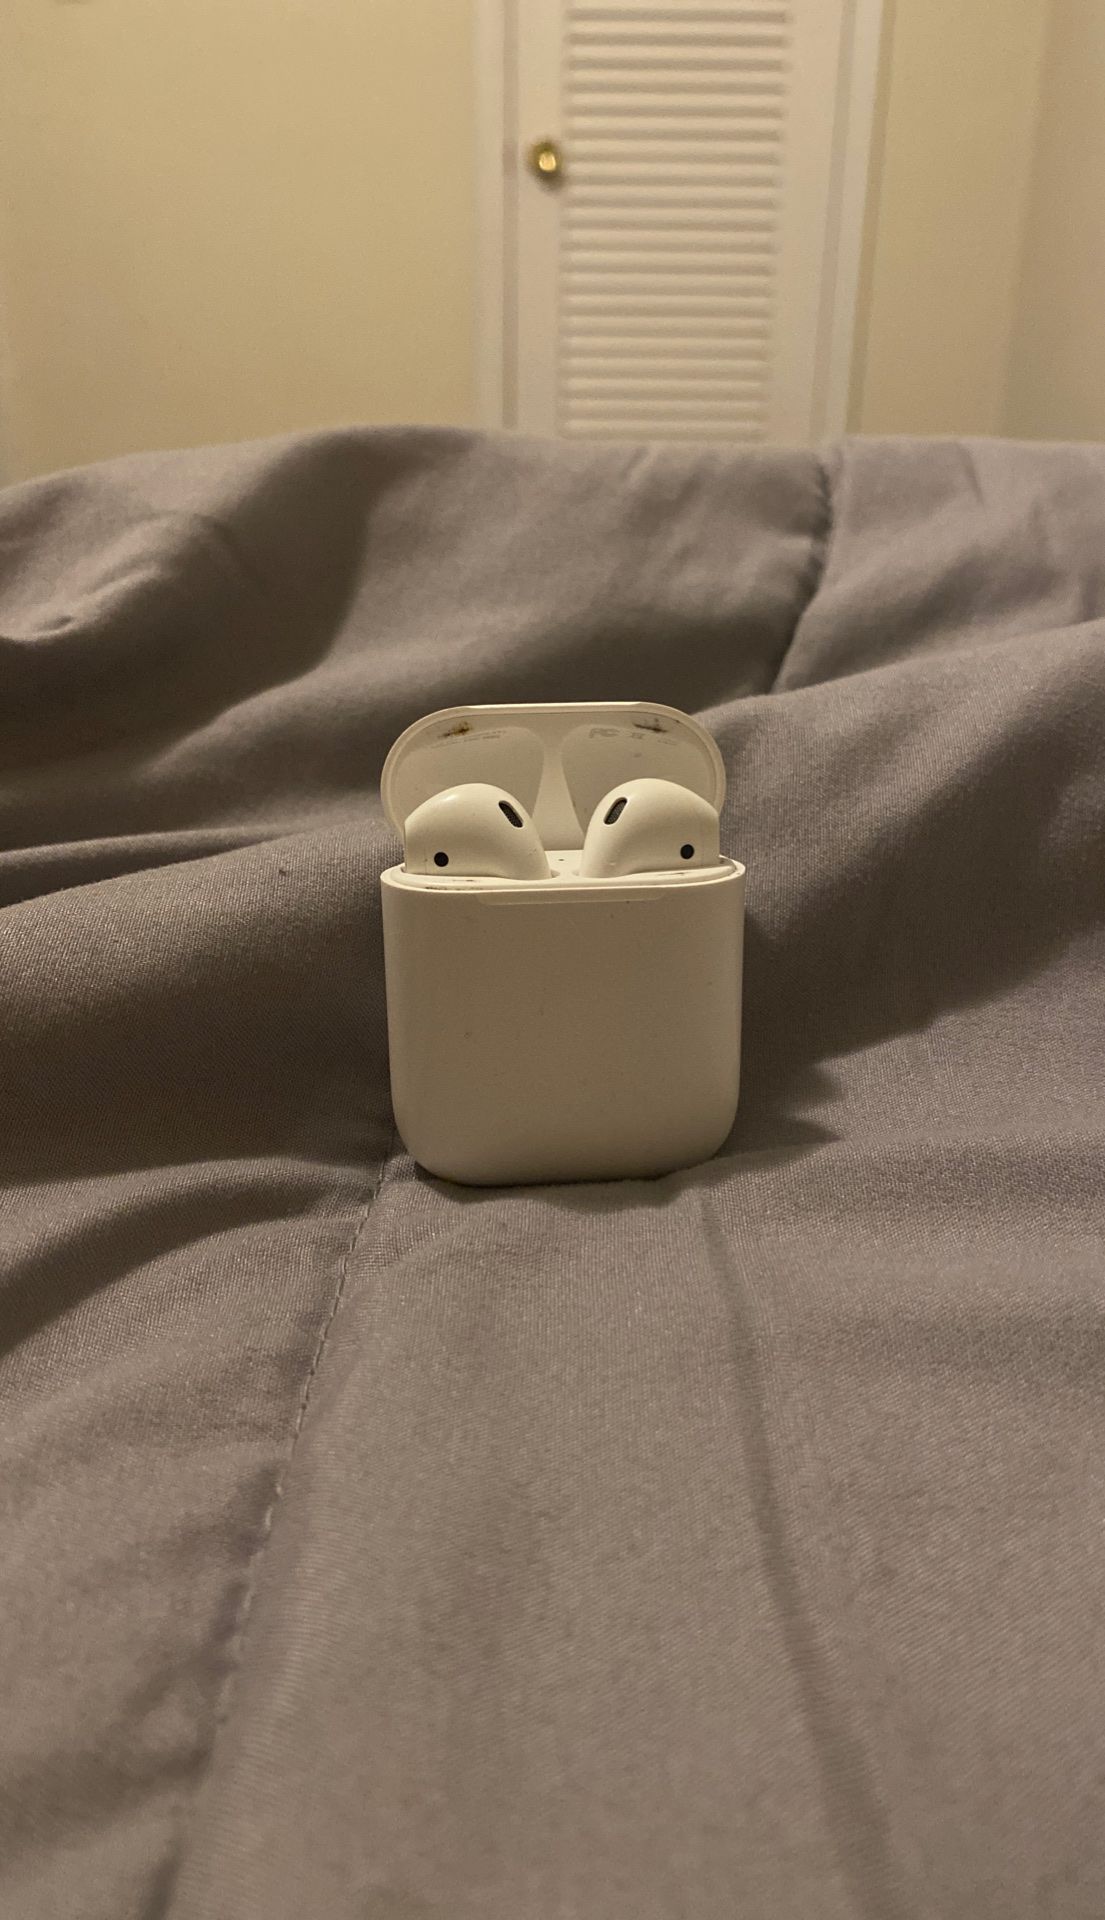 AirPods with rechargeable case (gen 2)